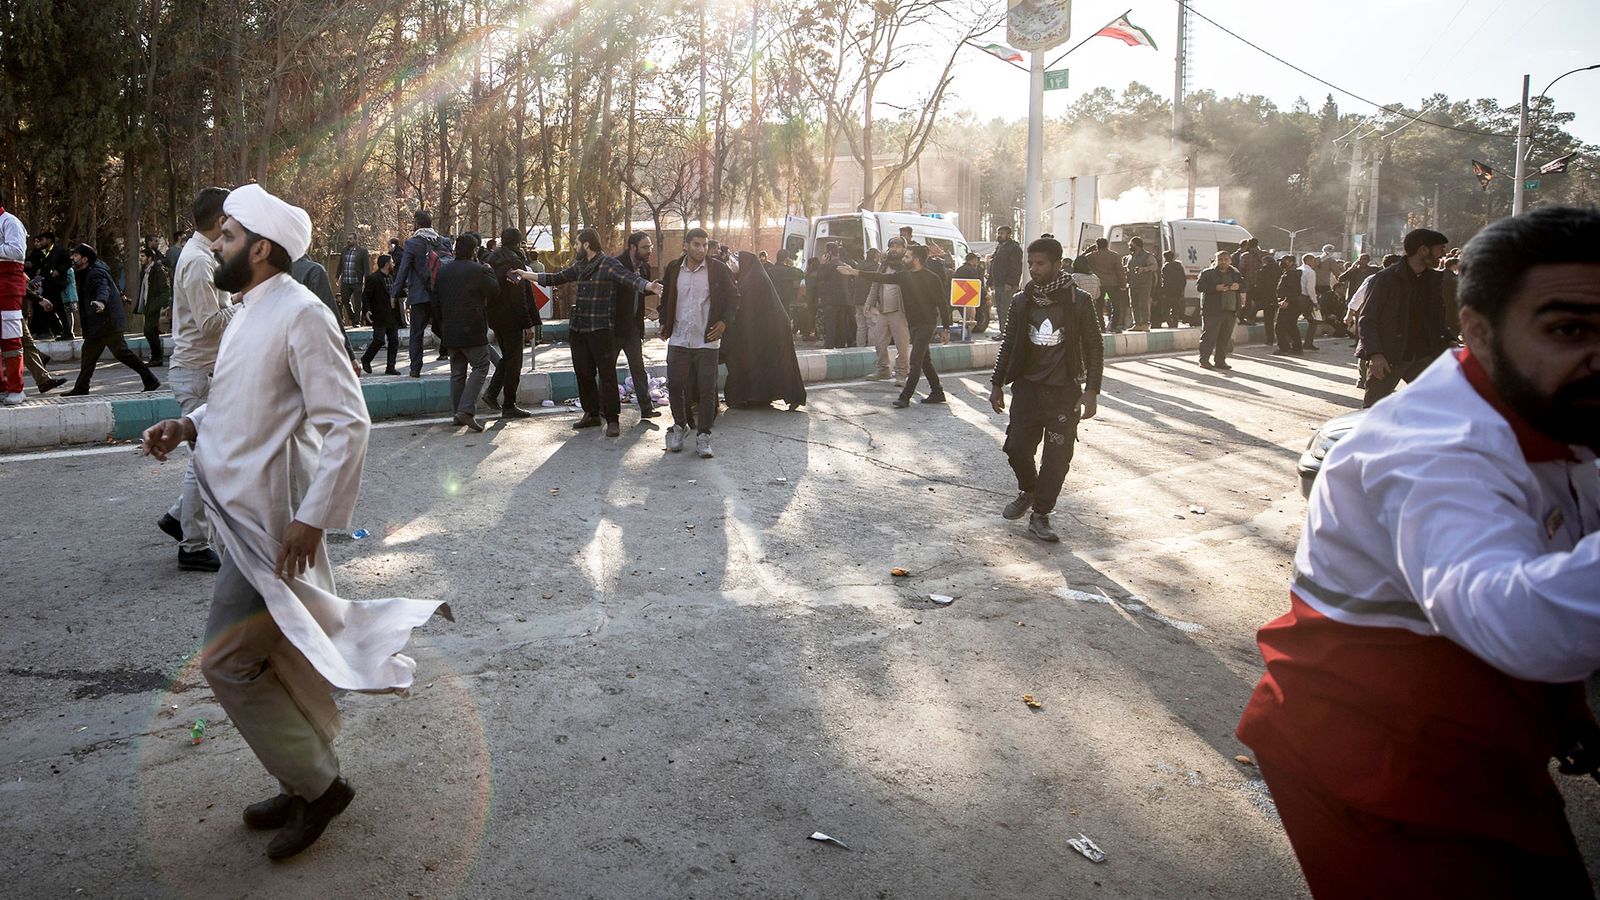 Iran vows revenge after more than 100 killed in blasts near tomb of former commander